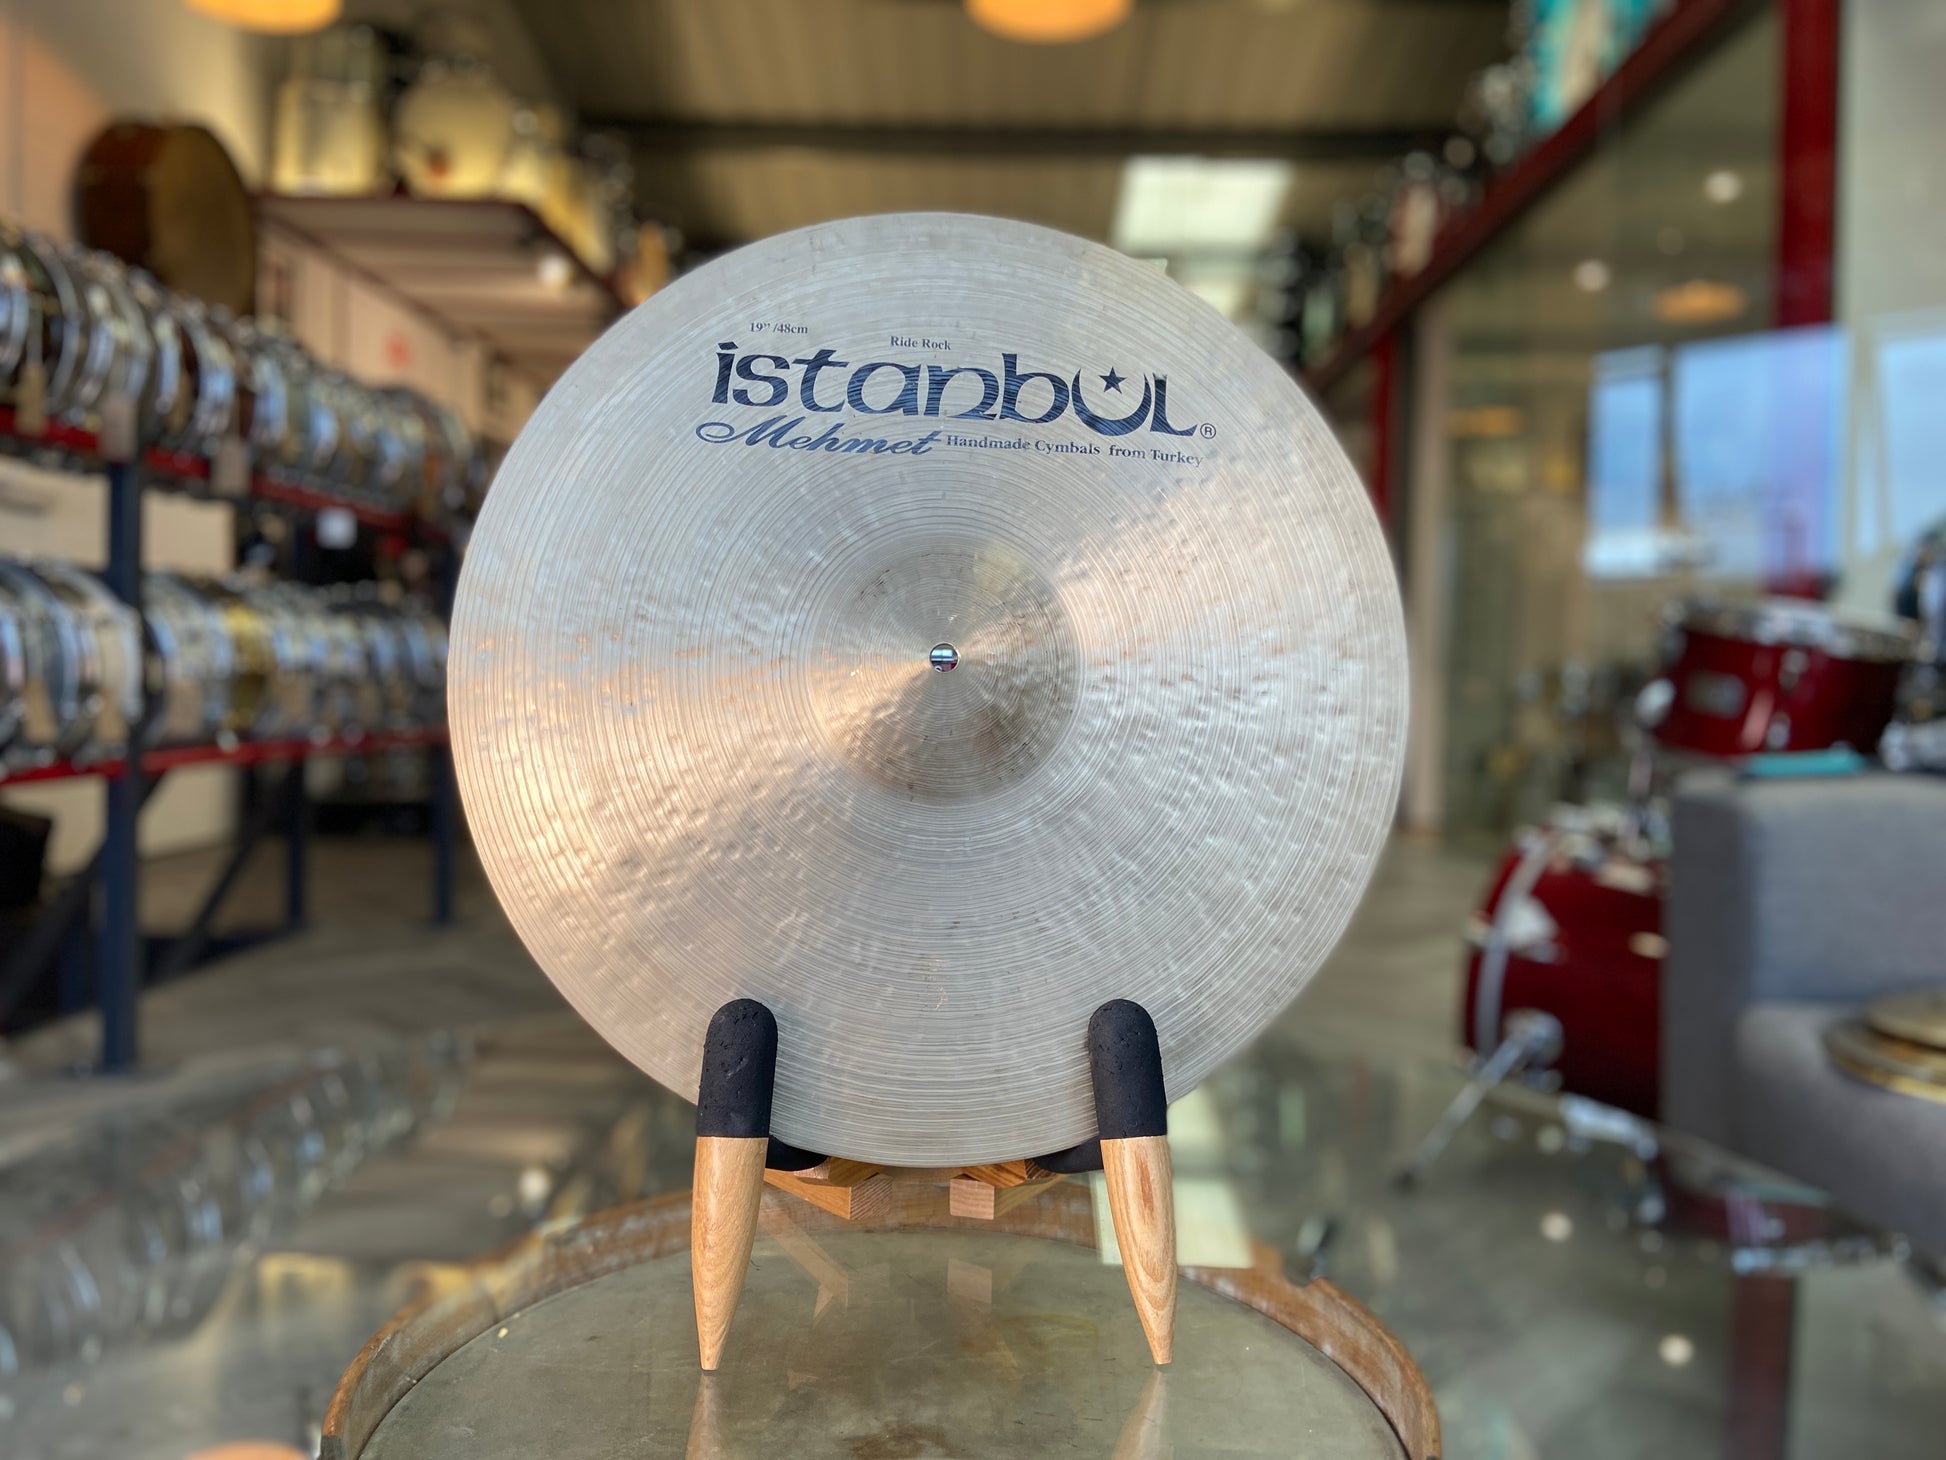 Istanbul Mehmet Traditional 19" Rock Ride Cymbal